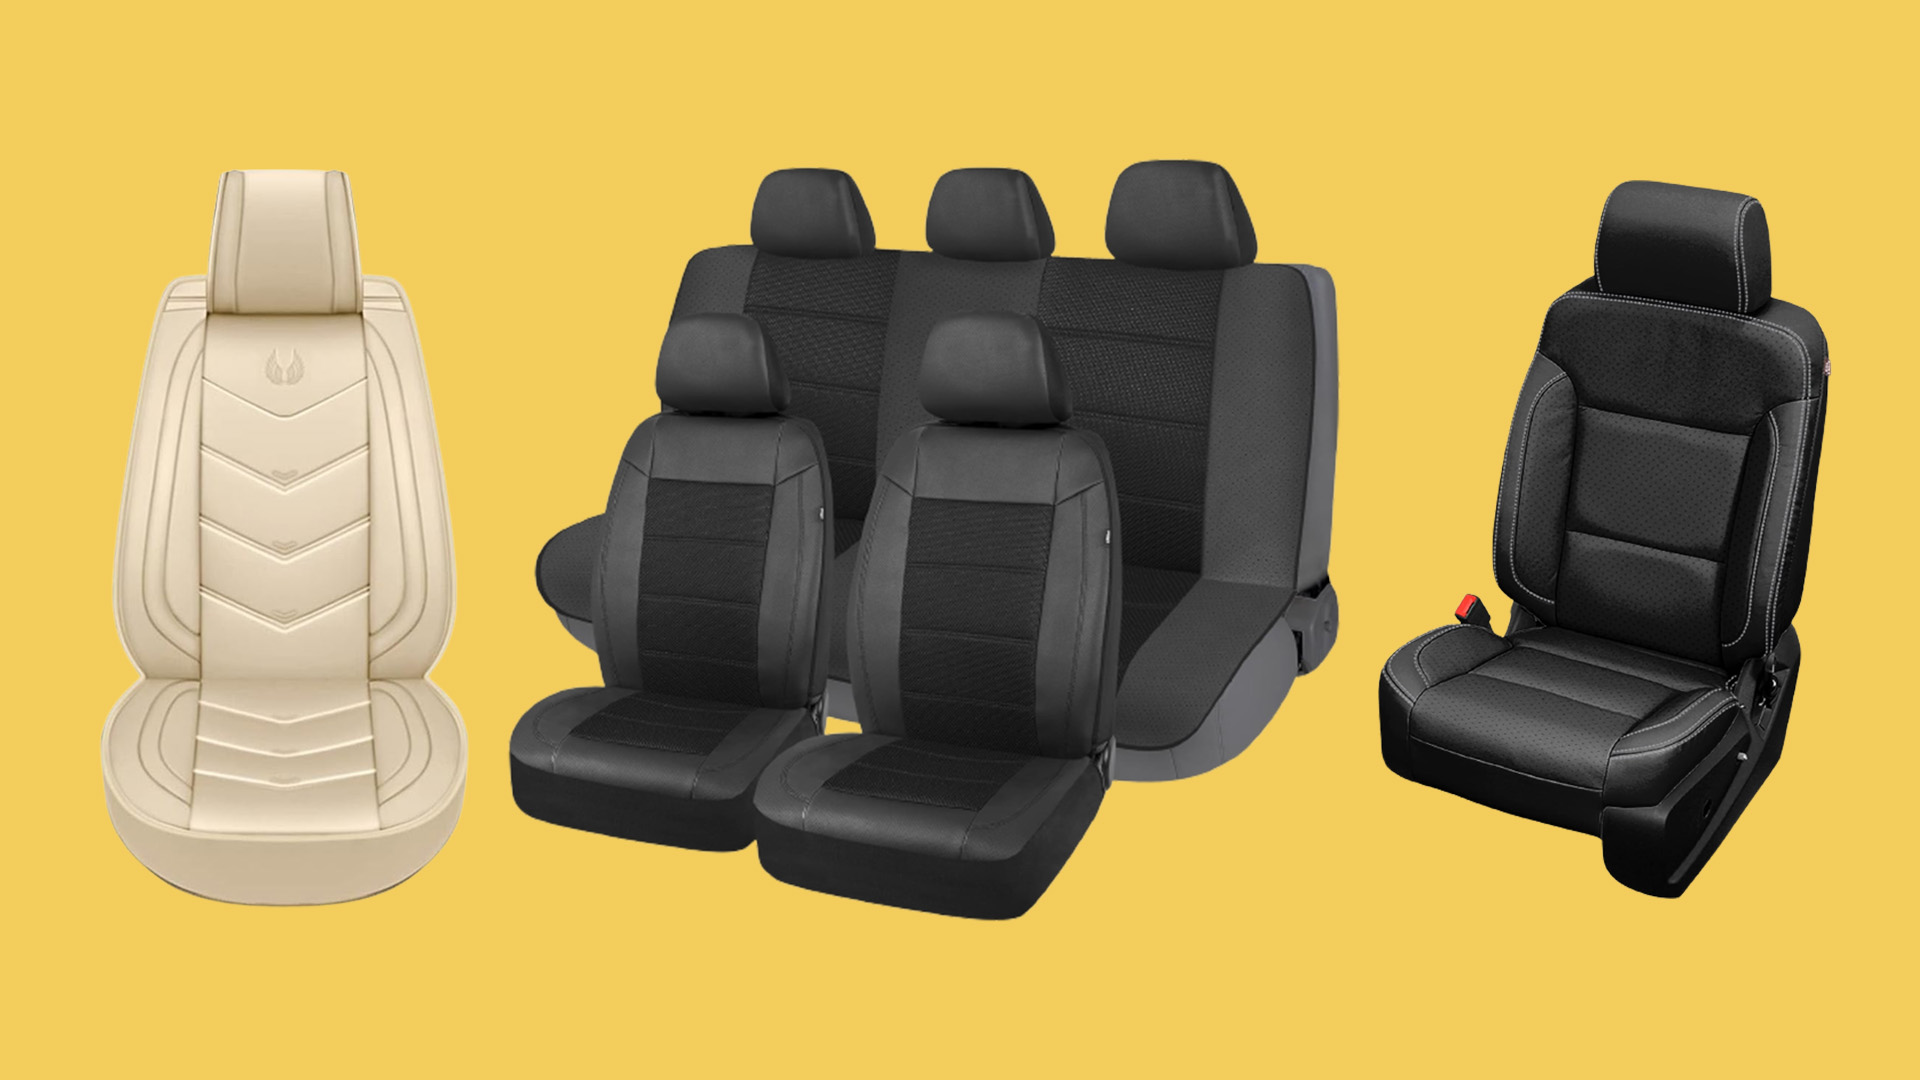 7 Reasons Why Eco Leather is the Best Seat Cover Material – Seat